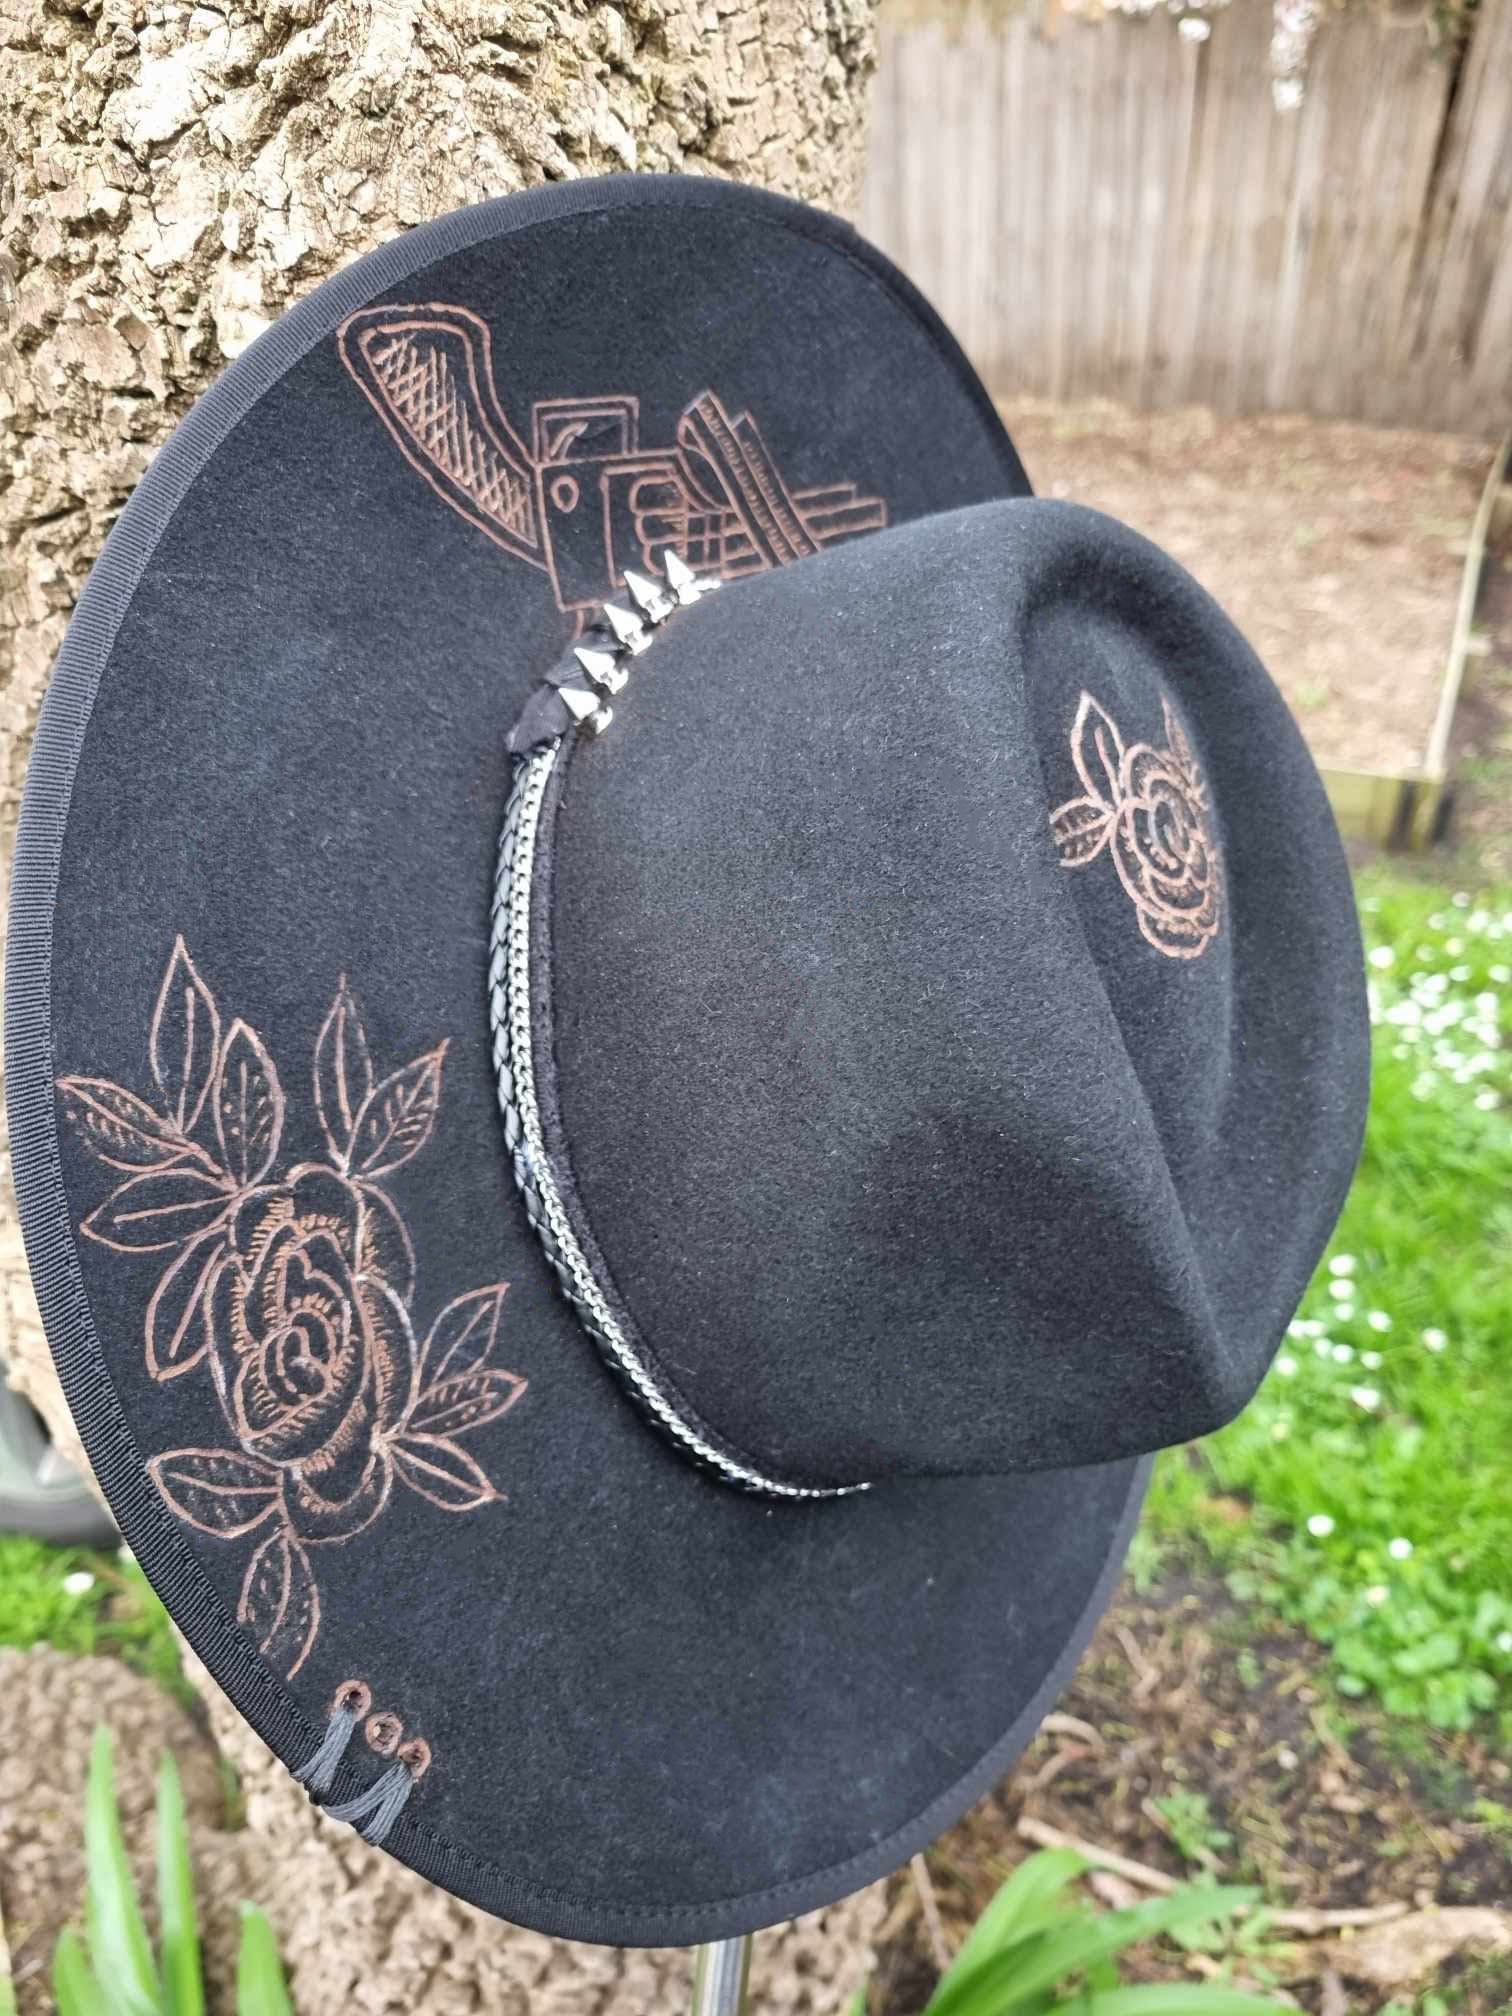 The Outlaw Hat